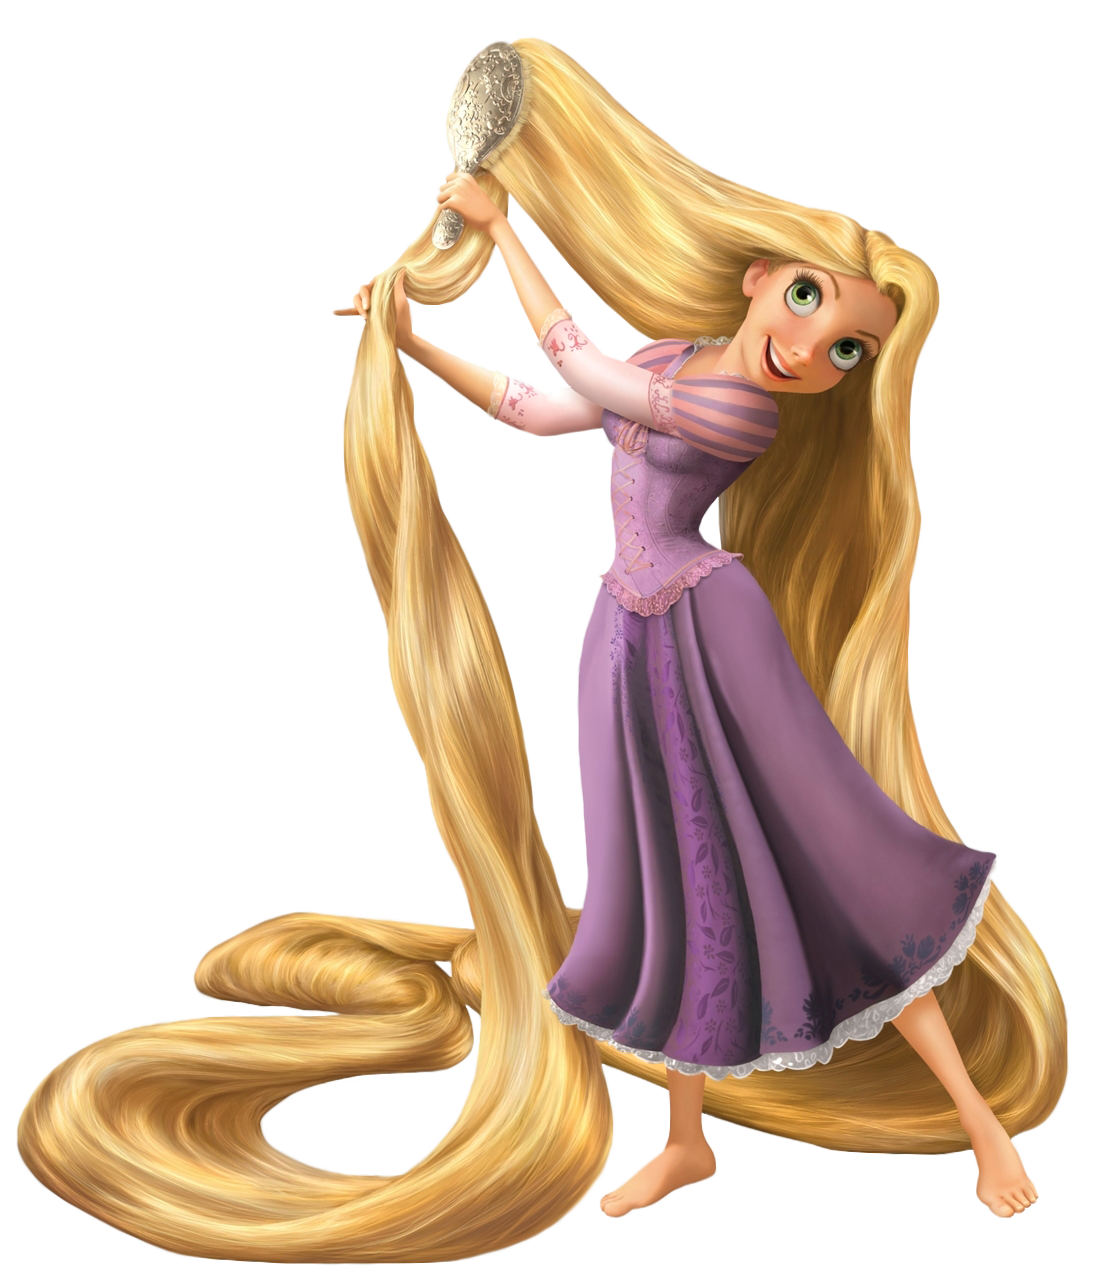 Png picture gallery yopriceville. Rapunzel clipart paint brush